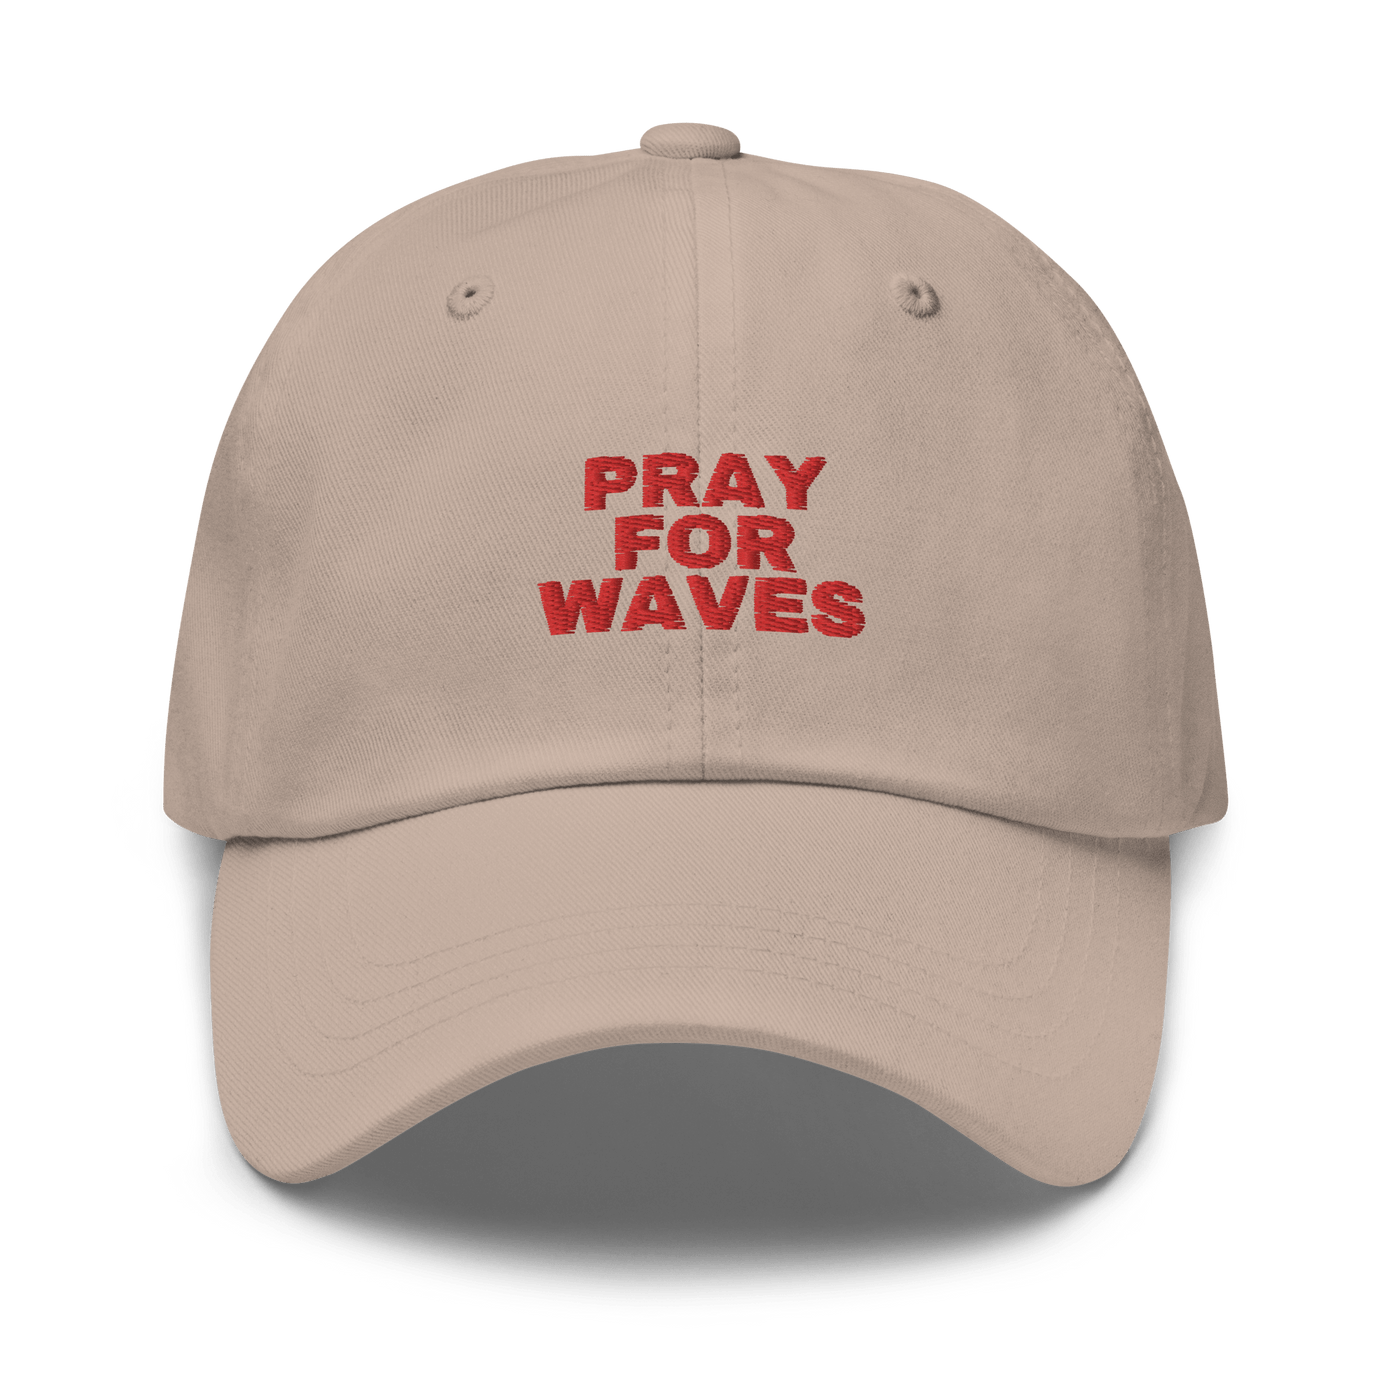 Pray For Waves Dad hat - Stone - Just Another Cap Store